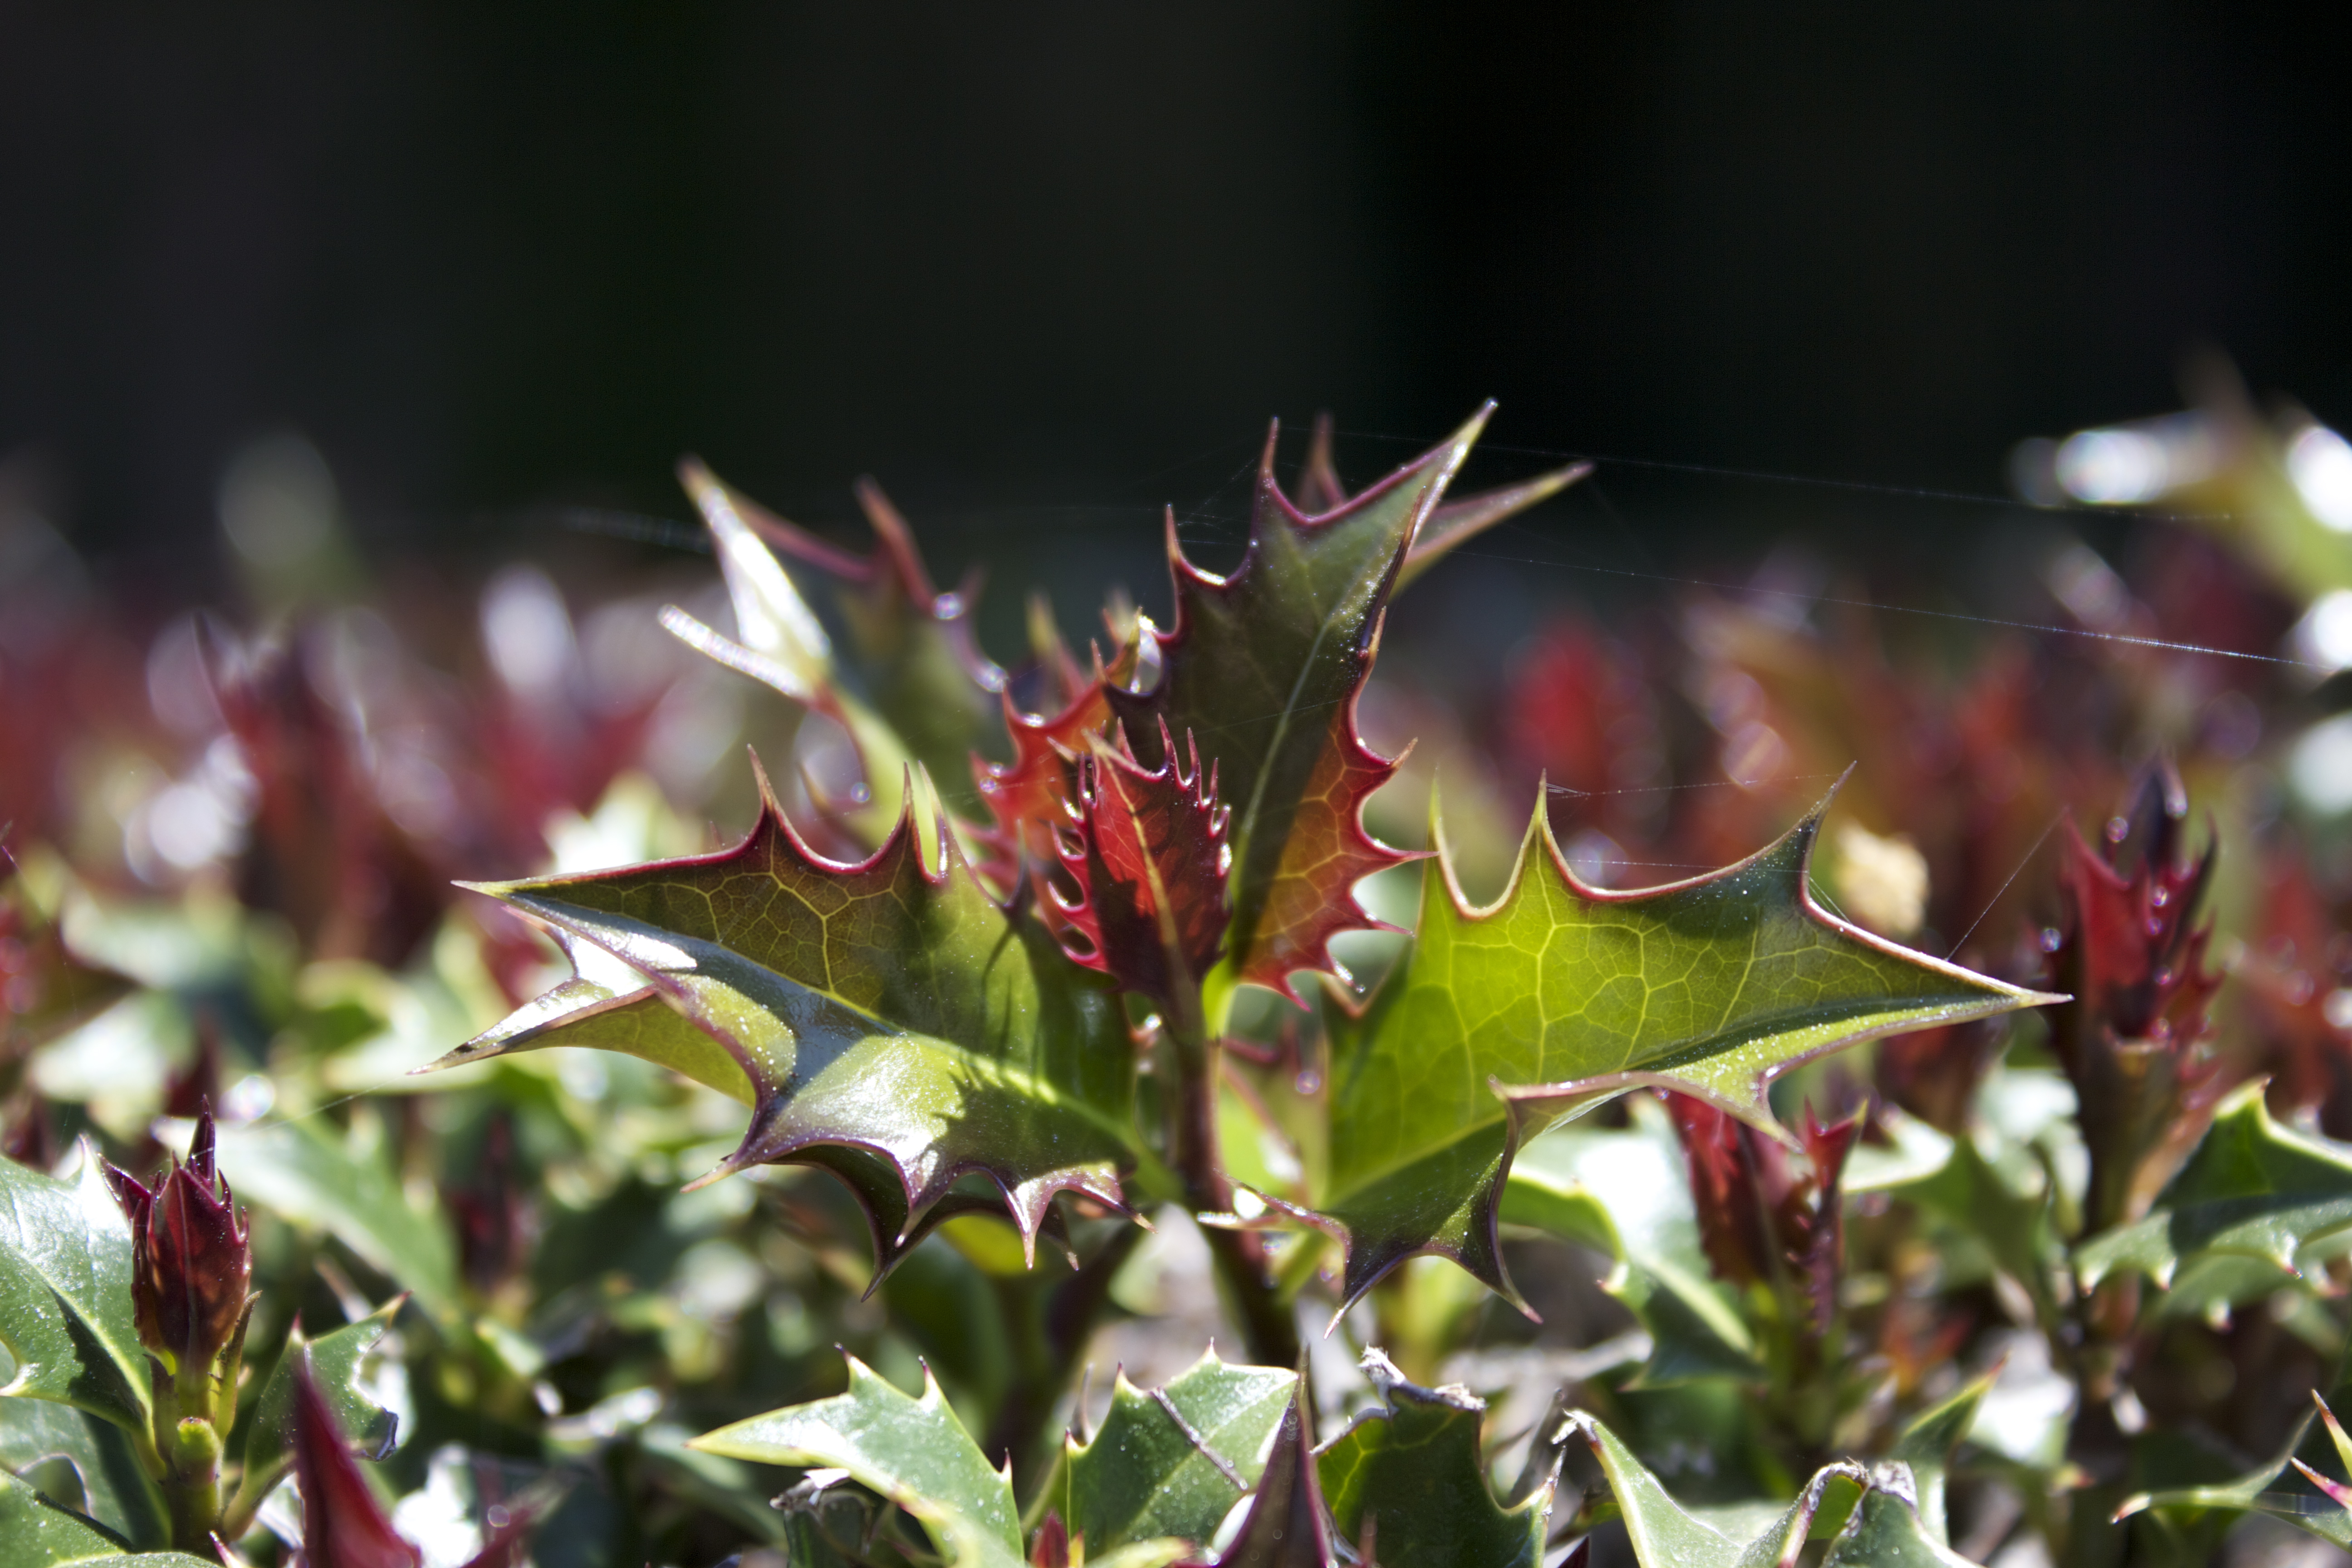 Closeup of spiky green and red leaves on a bush resembling holly (though I'm not sure that's what it is).